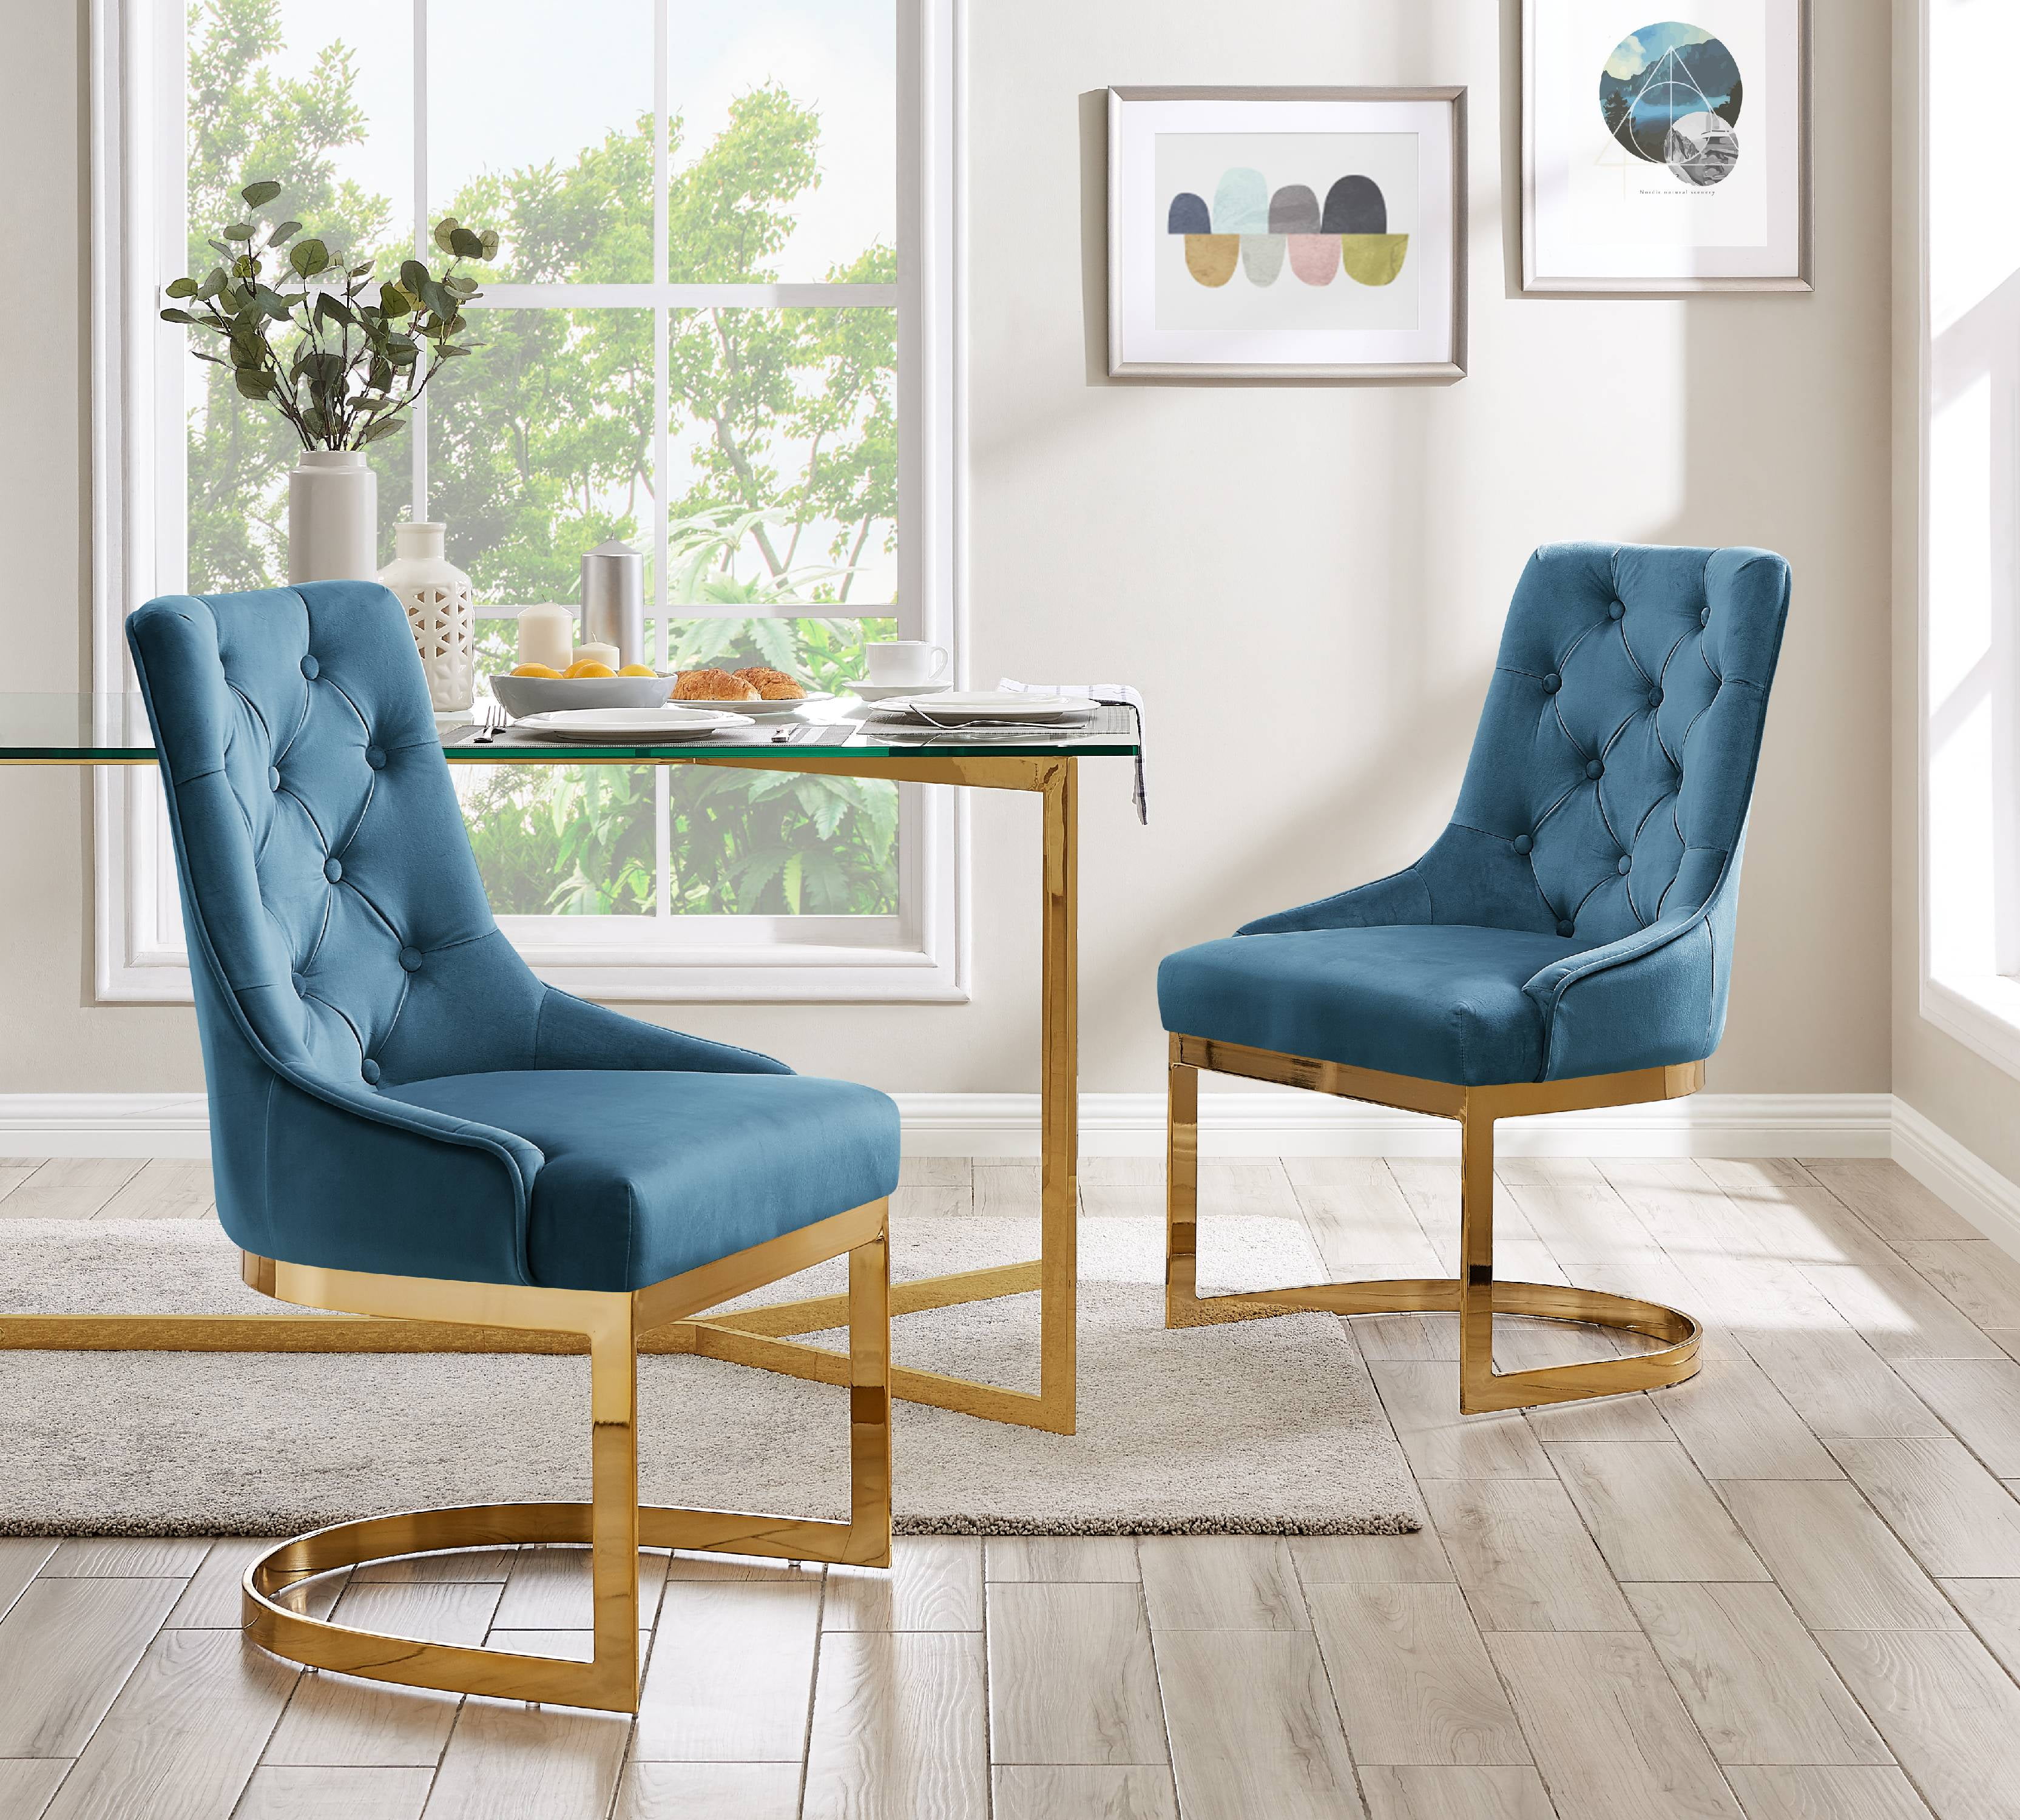 FixturesFirst Greta Dining Side Accent Chair with Button Tufted Velvet Upholstery Half-Moon Gold Plated Solid Metal U-Shaped Base Modern Conte